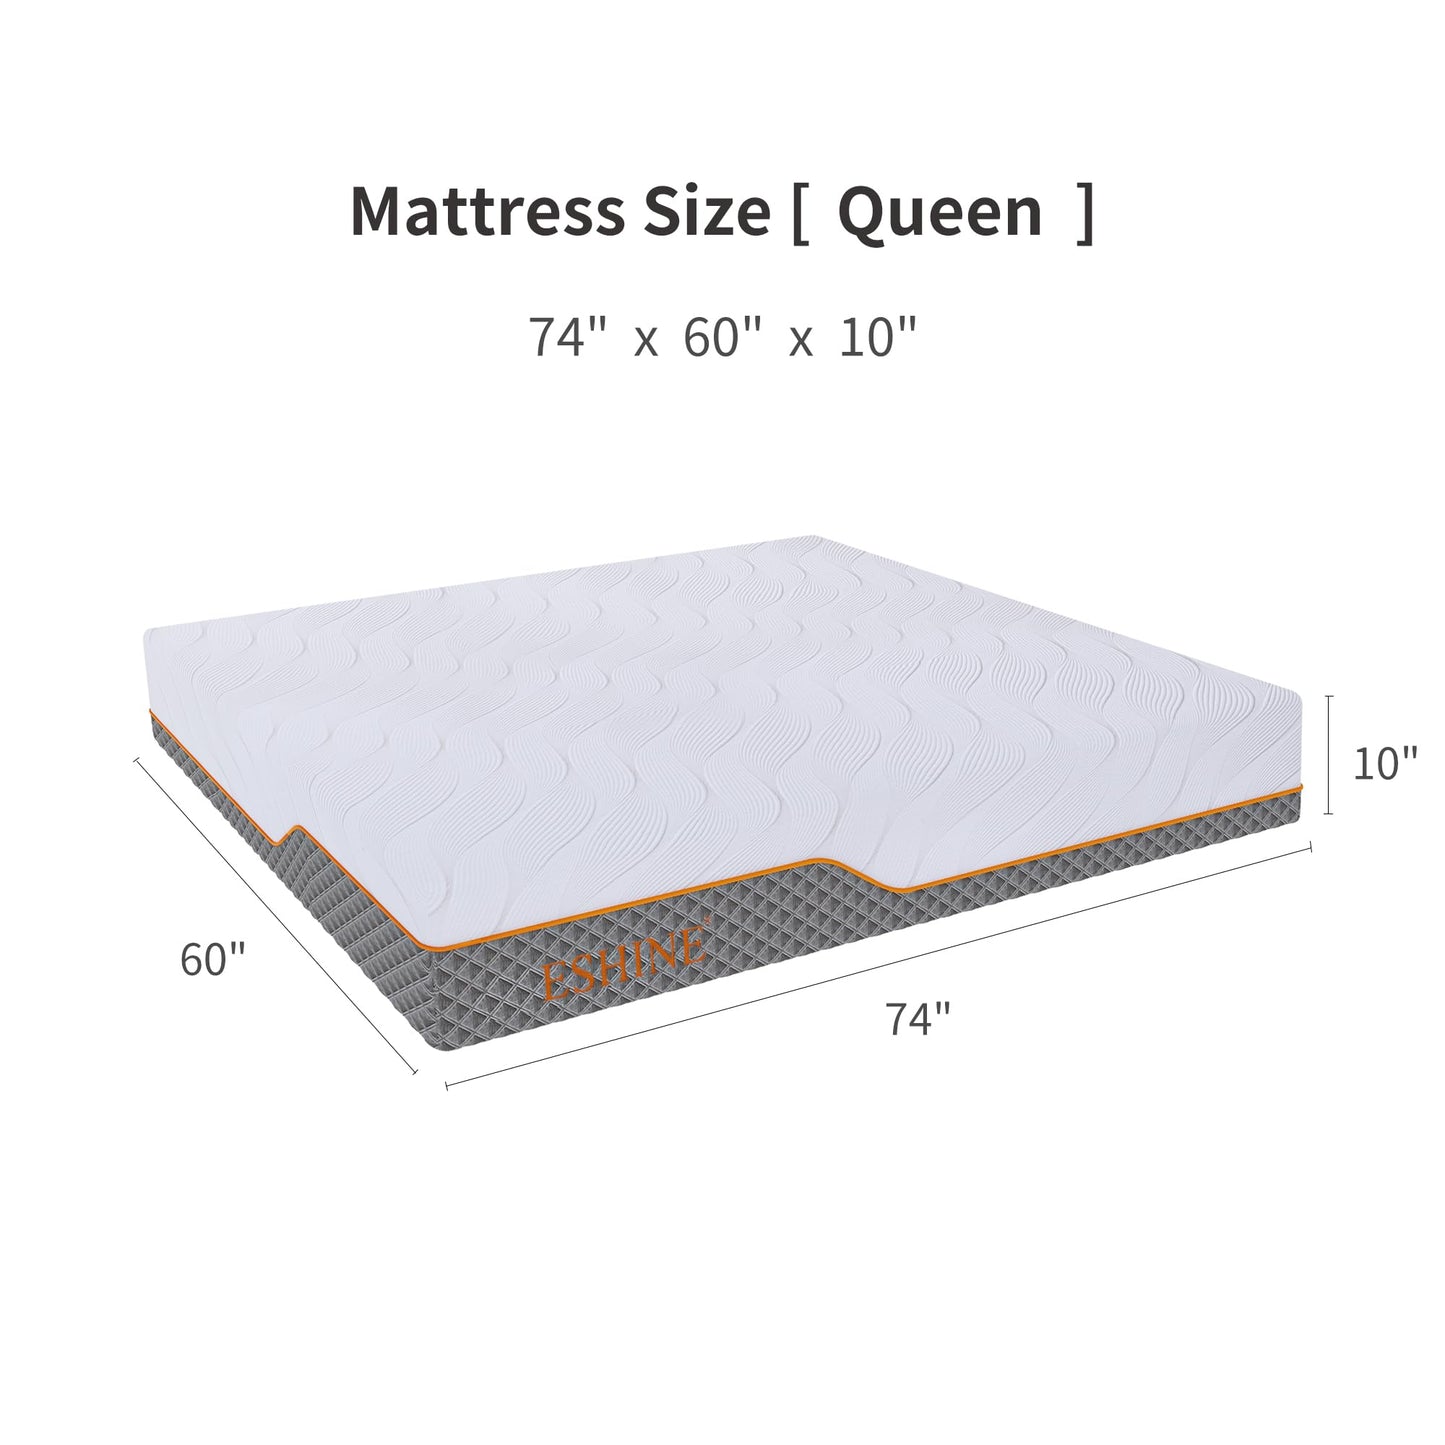 ESHINE Short Queen RV Mattress - 10" Memory Foam RV Mattress, Shock-Absorbing and Pressure-Relieving, for RVs, Campers & Trailers